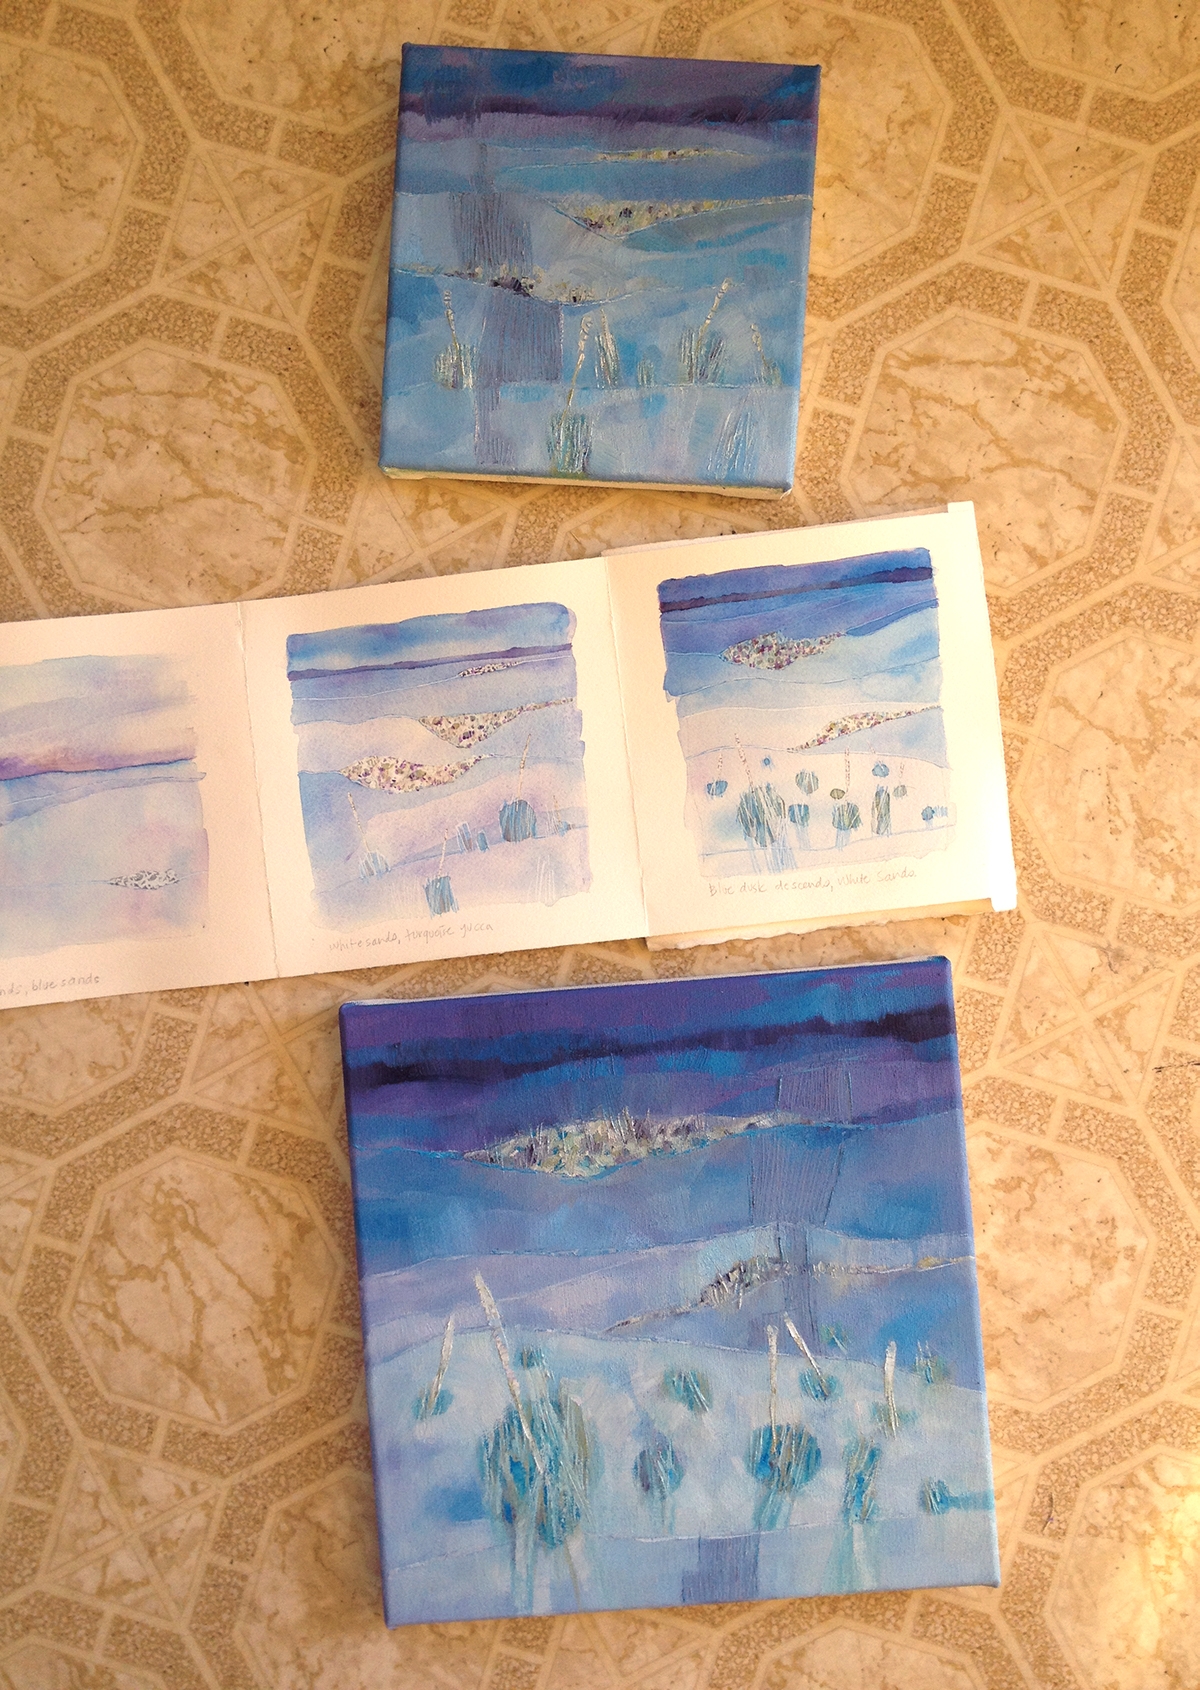 Small White Sands works in progress